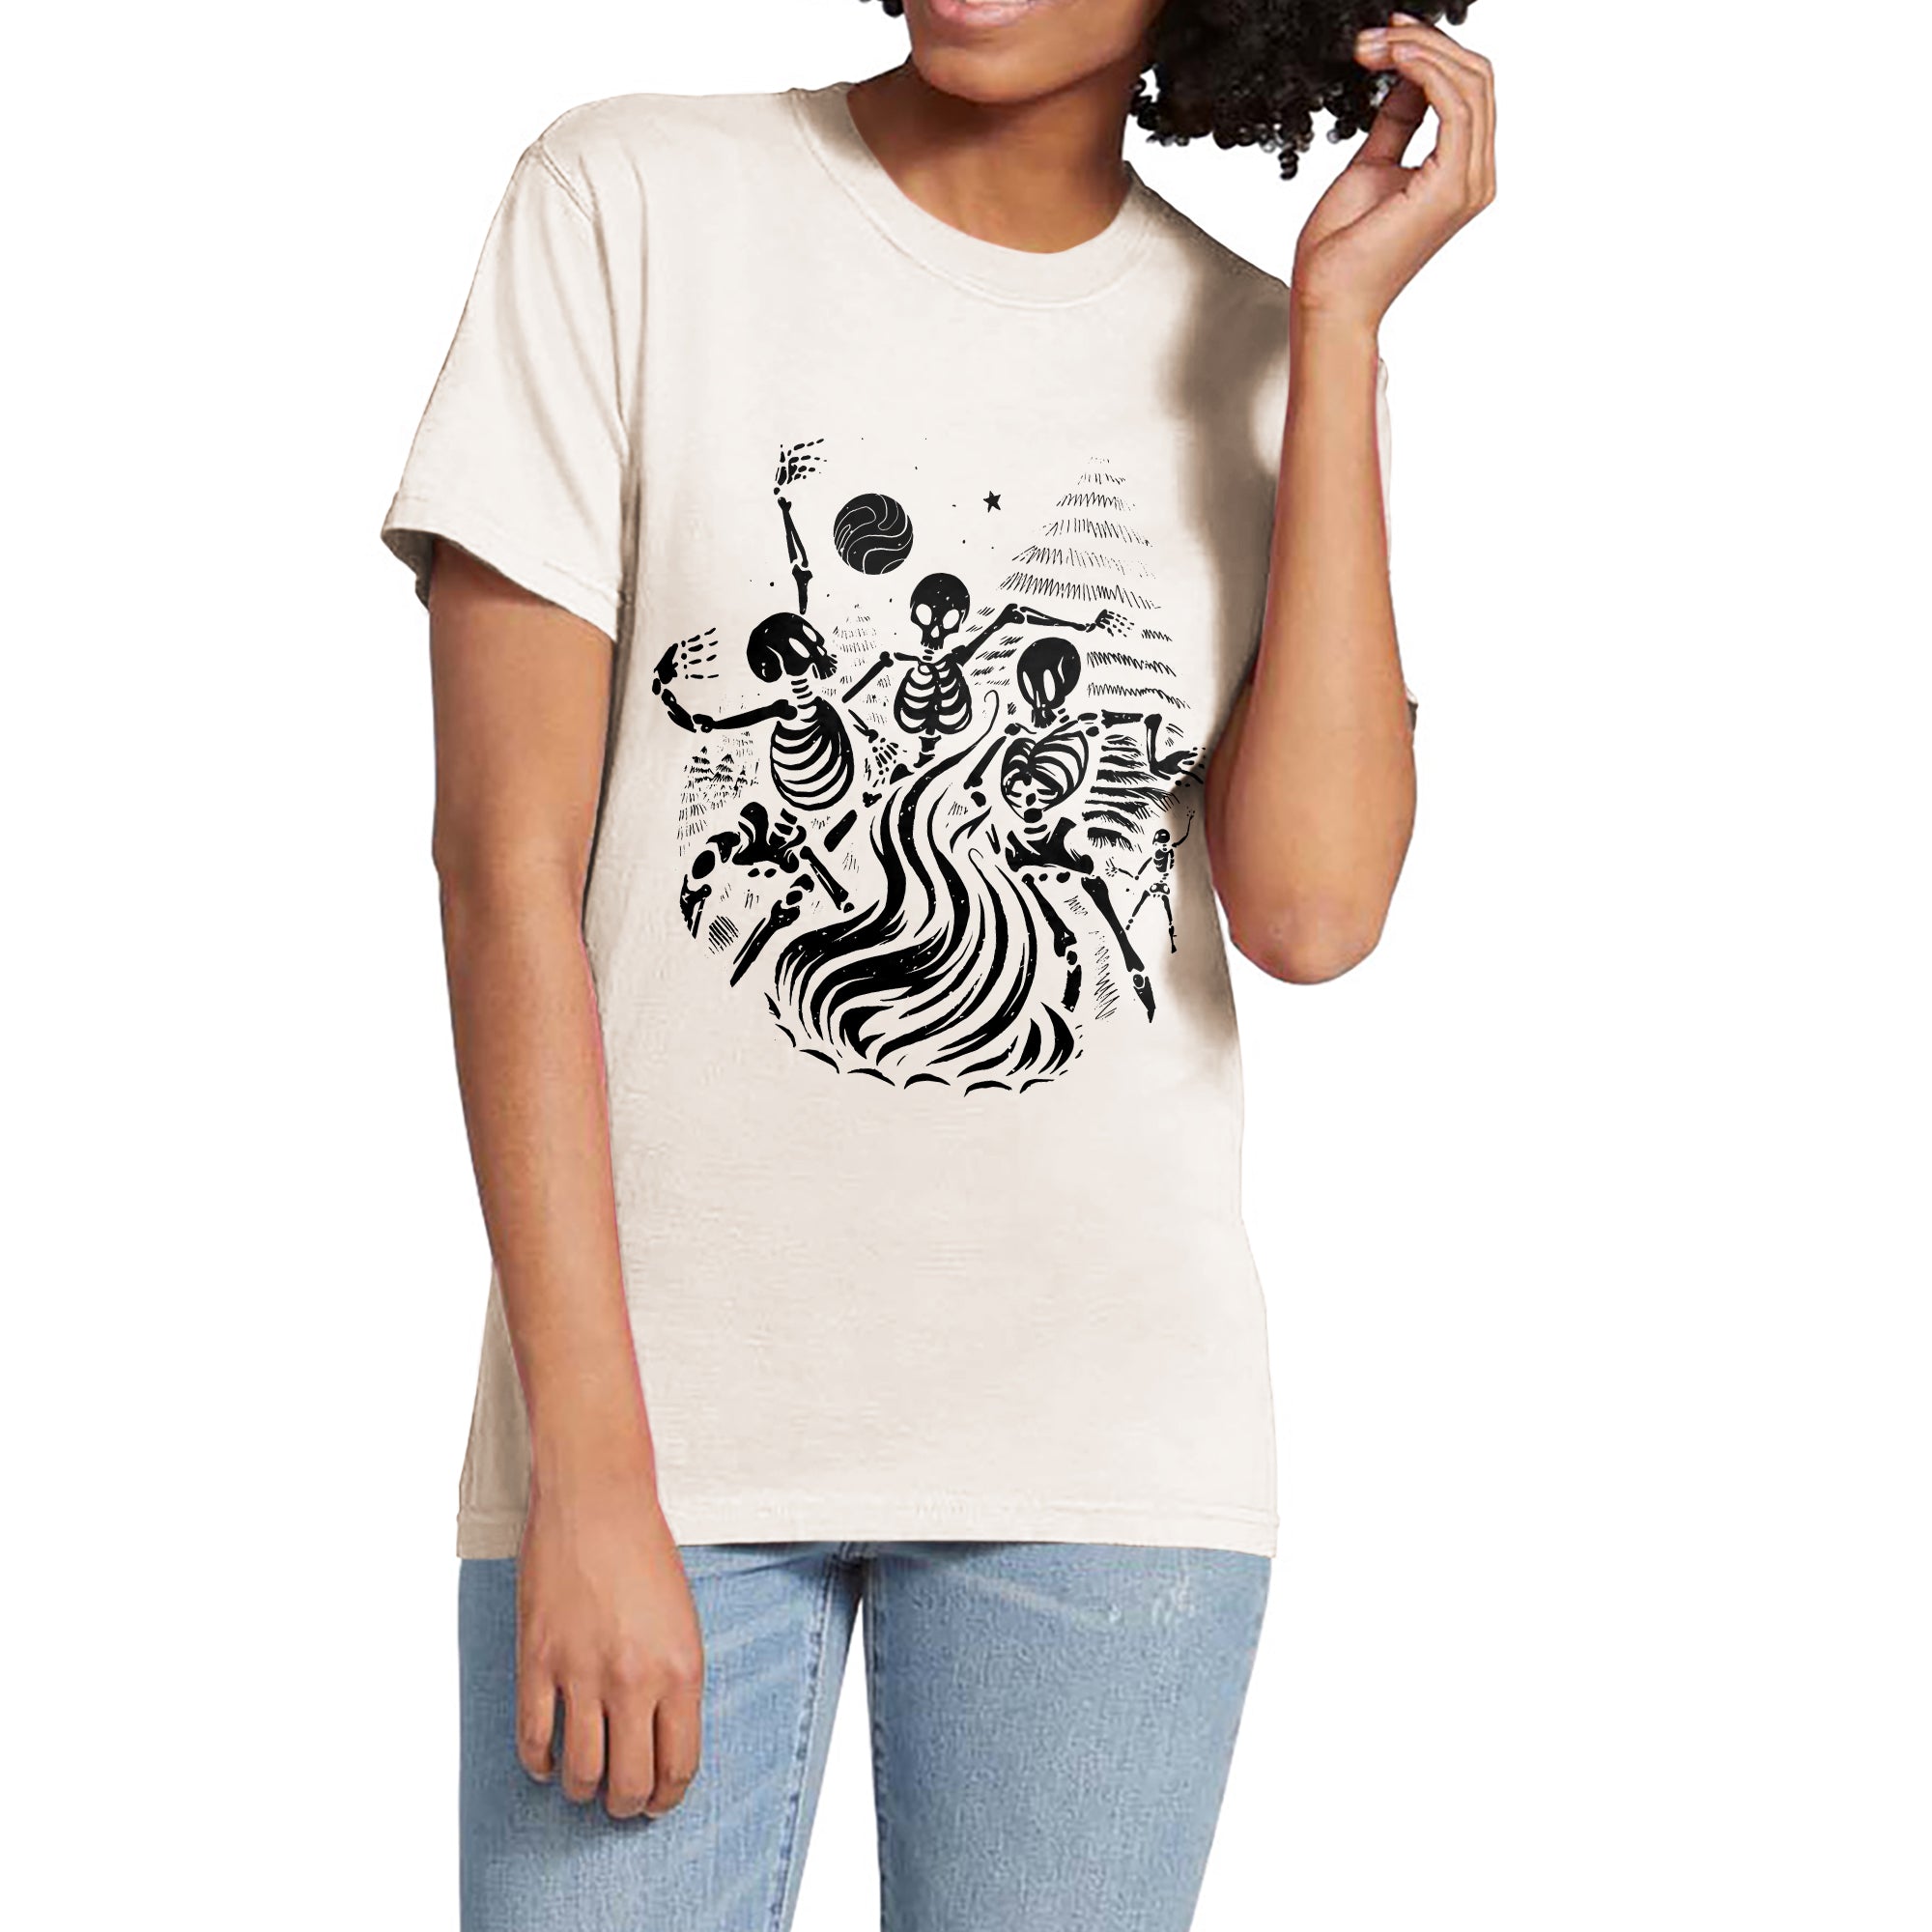 Skeleton Dancing Tree Garment-Dyed Tee - Stories You Can Wear